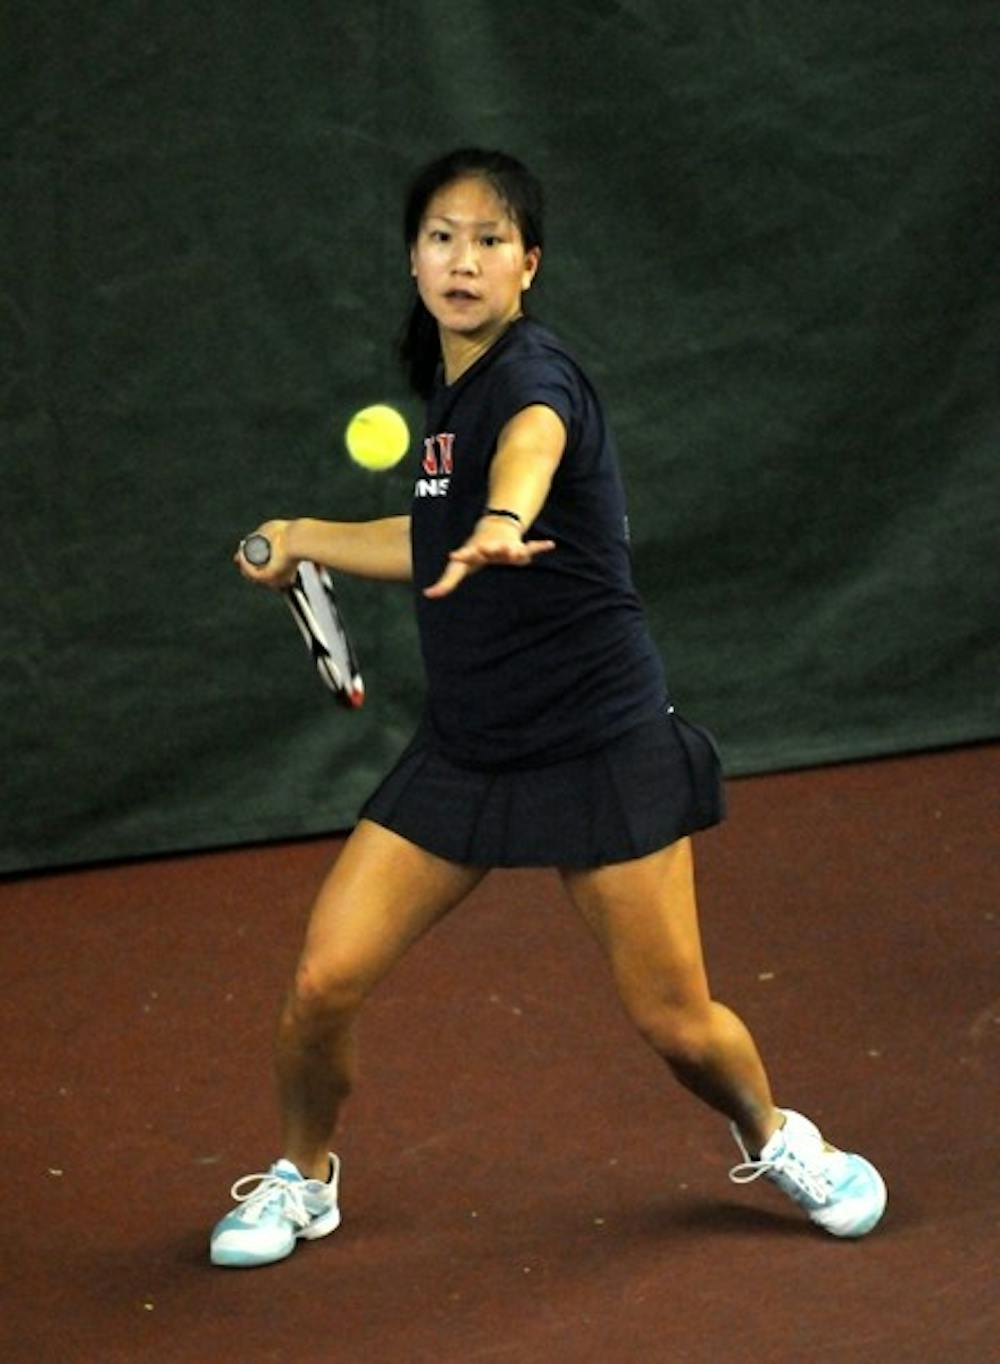 Senior captain Stephanie Do will play her final match in a Penn uniform on Sunday, as her team continues to search for its first Ivy win of the season.